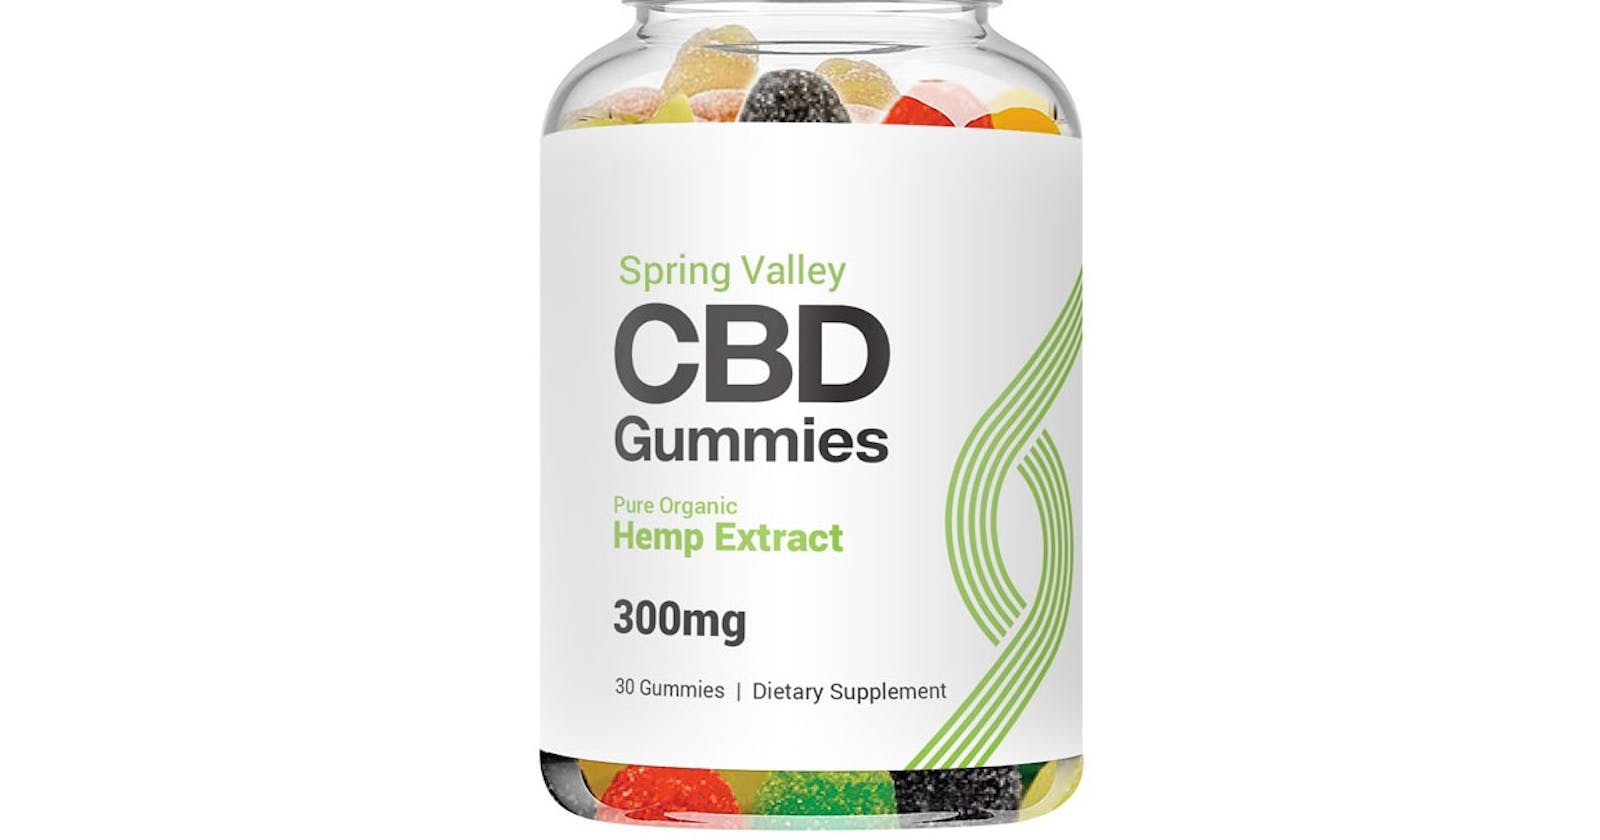 Spring Valley CBD Gummies Reviews - Made From Natural Ingredients, Fight Pain & Stress!